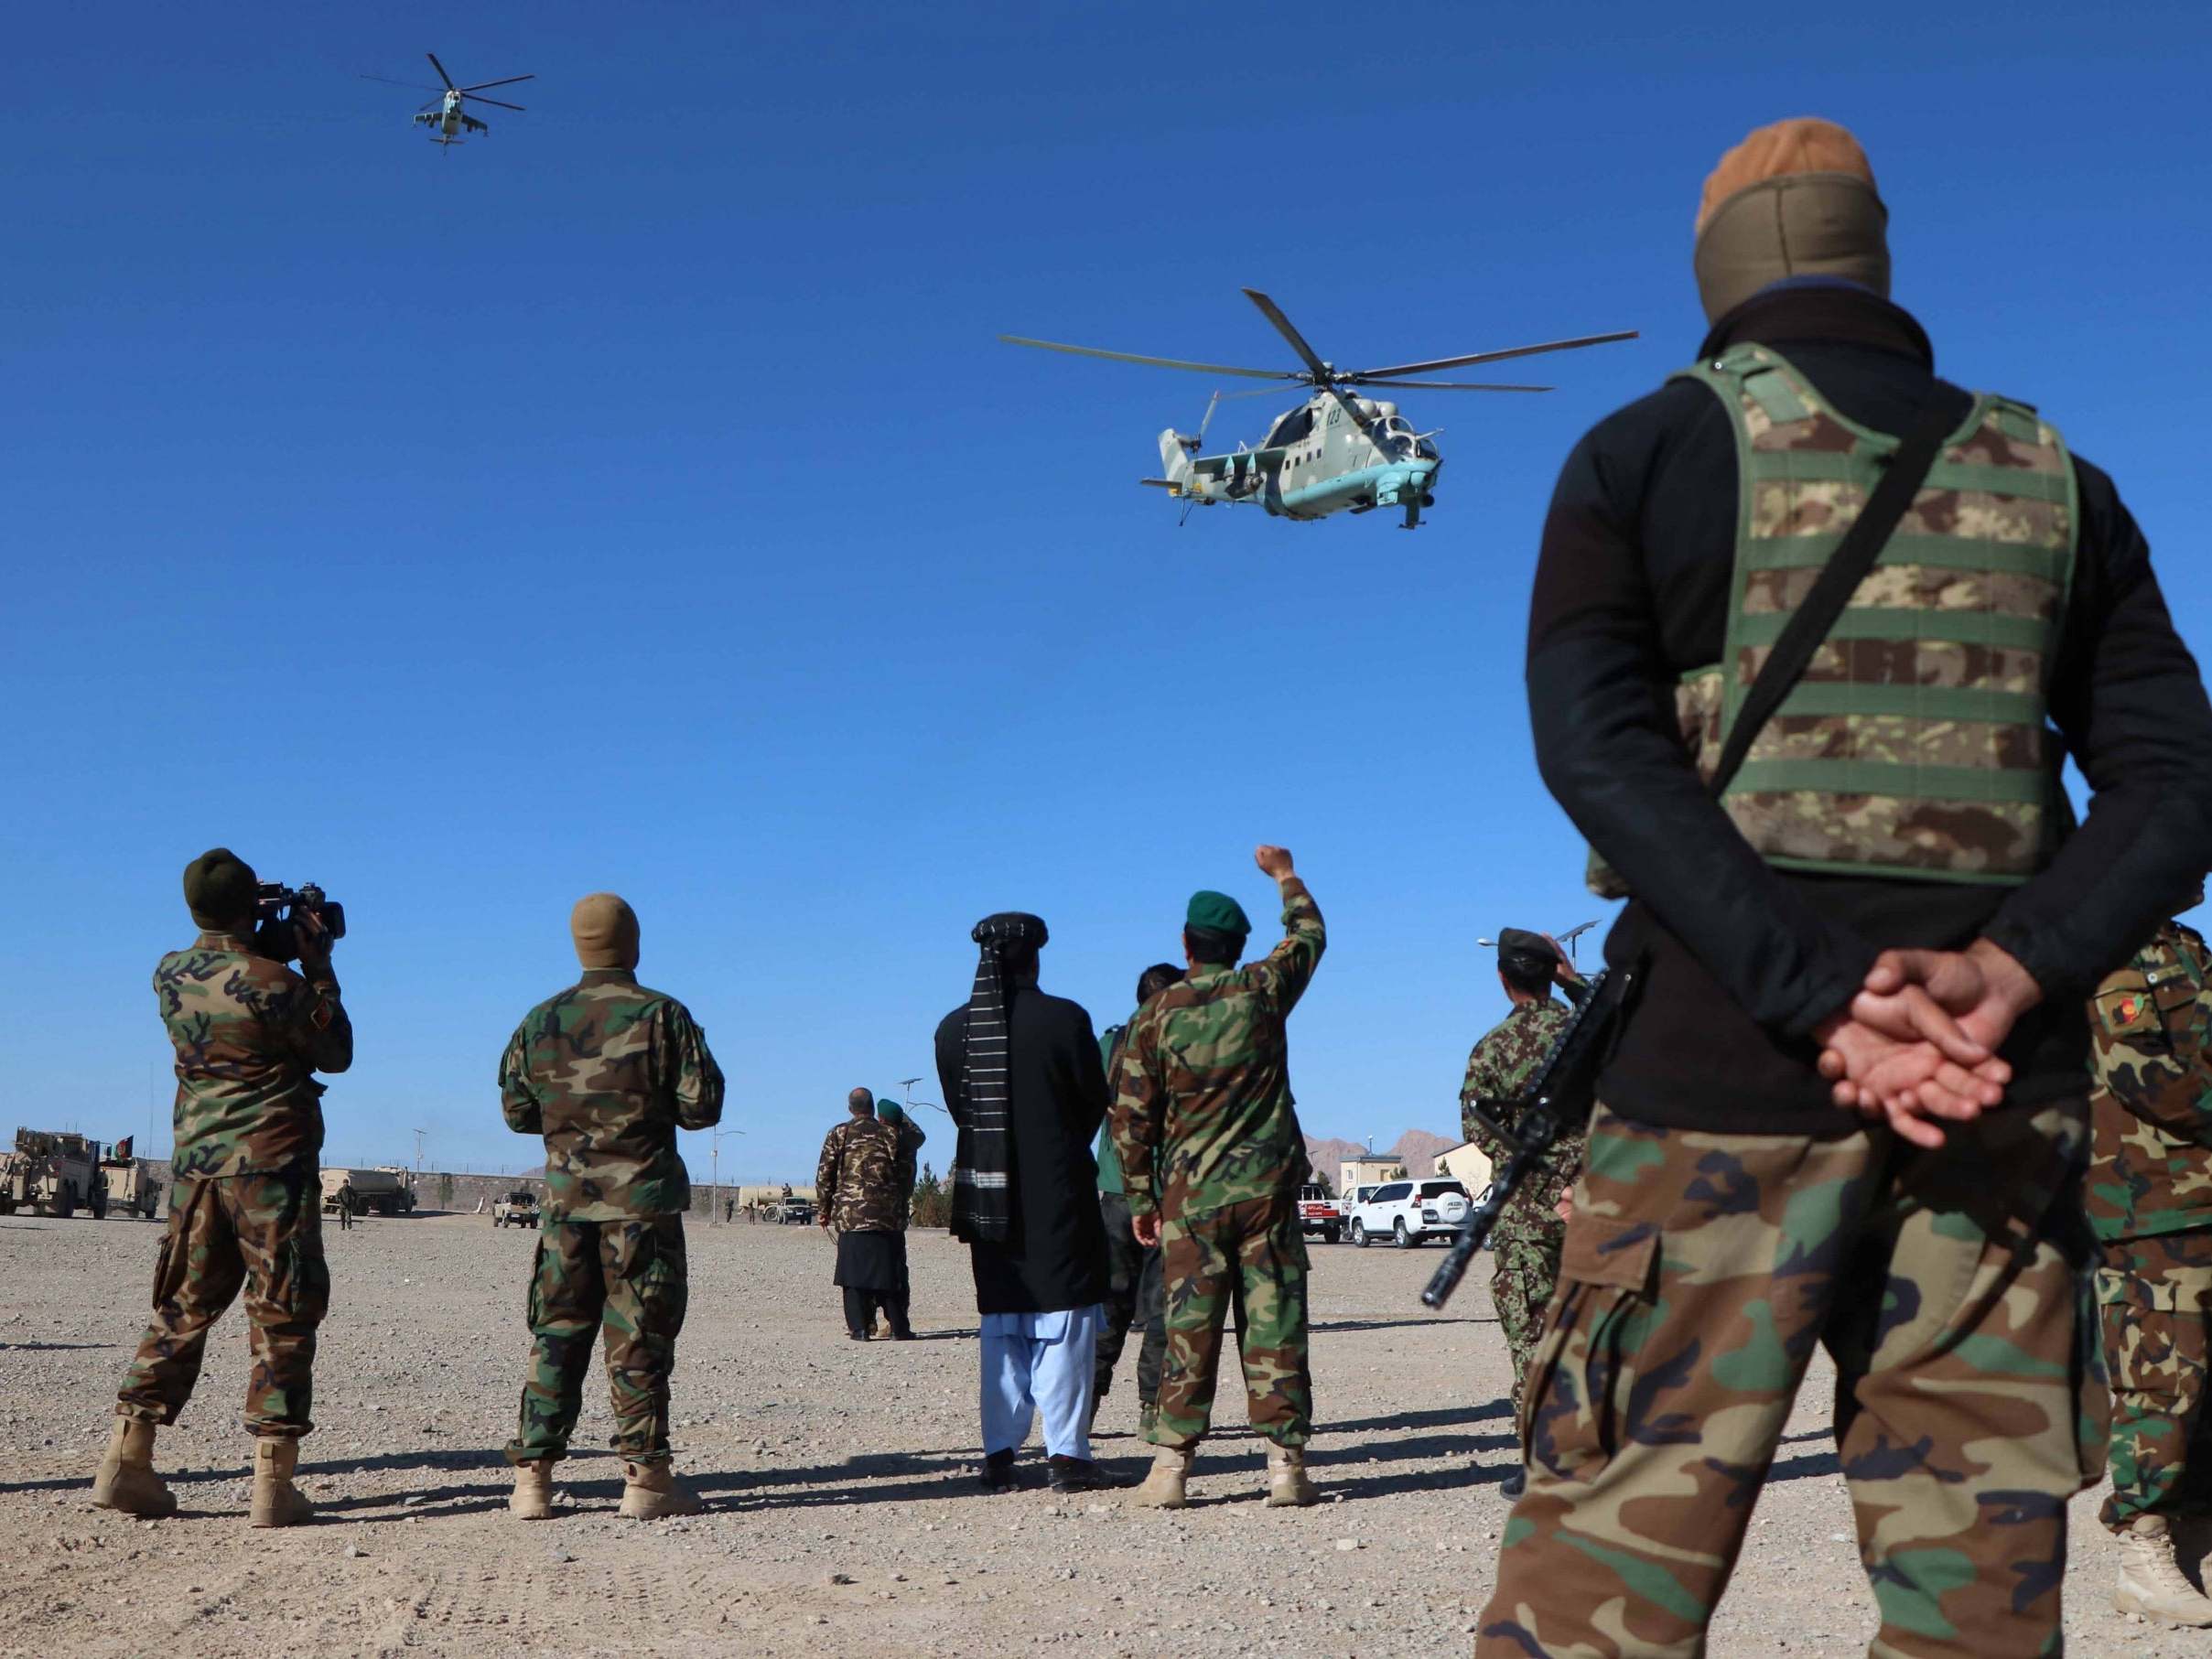 Afghan security forces prepare for an operation against Taliban militants in Herat